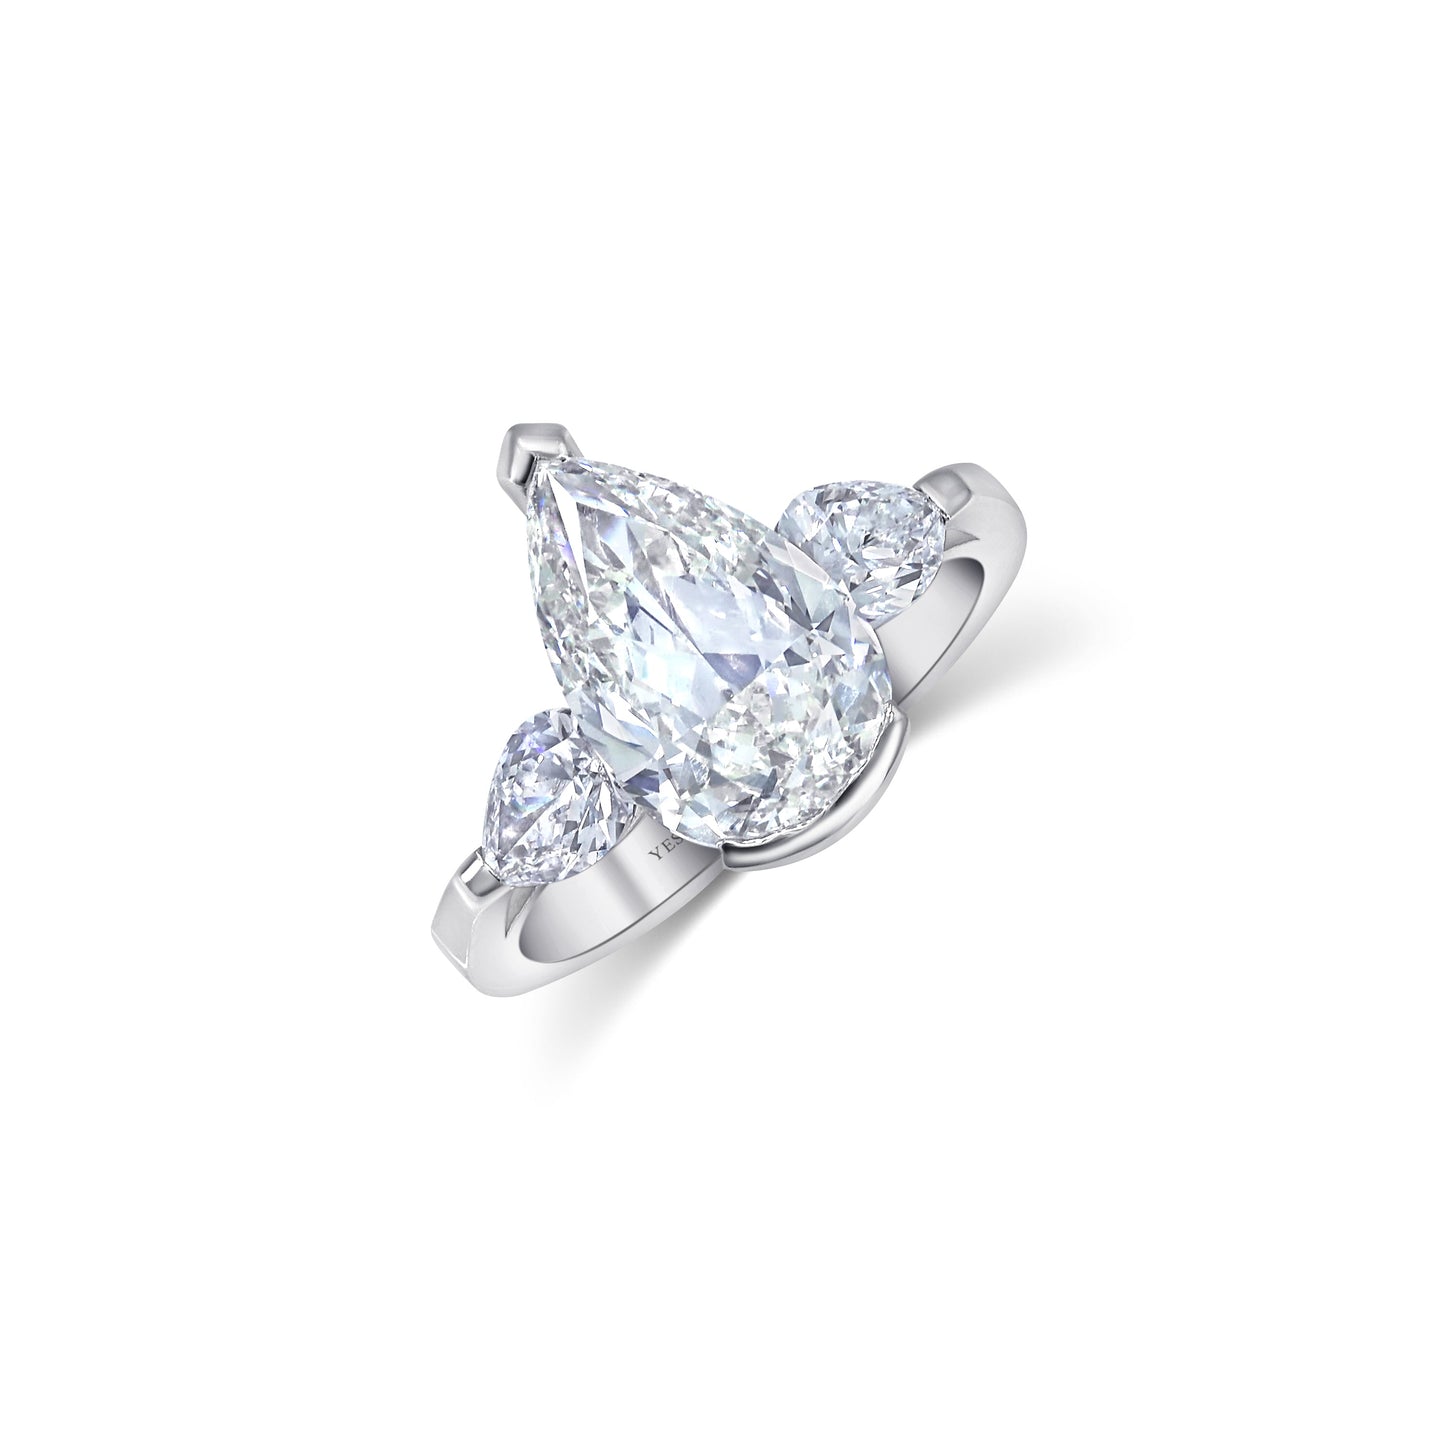 Almasaty 3.33 Carats Certified Pear Cut Solitaire Diamond Ring